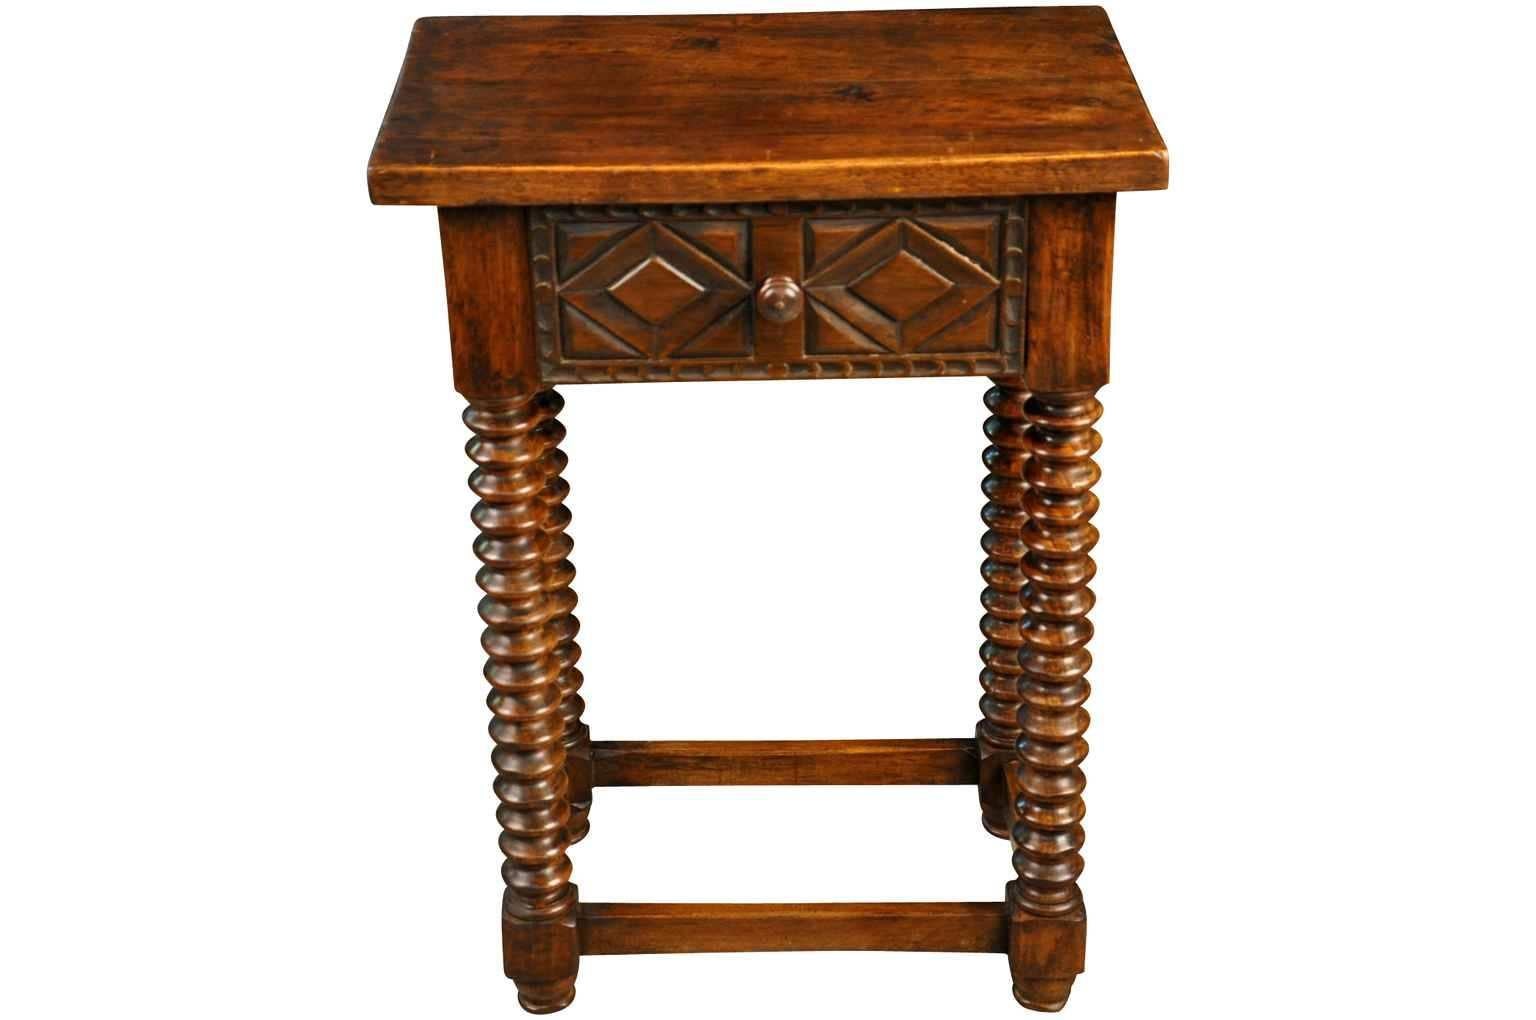 A charming 19th century Spanish side table. Beautifully constructed in walnut with nicely turned legs and a craved drawer fascia.